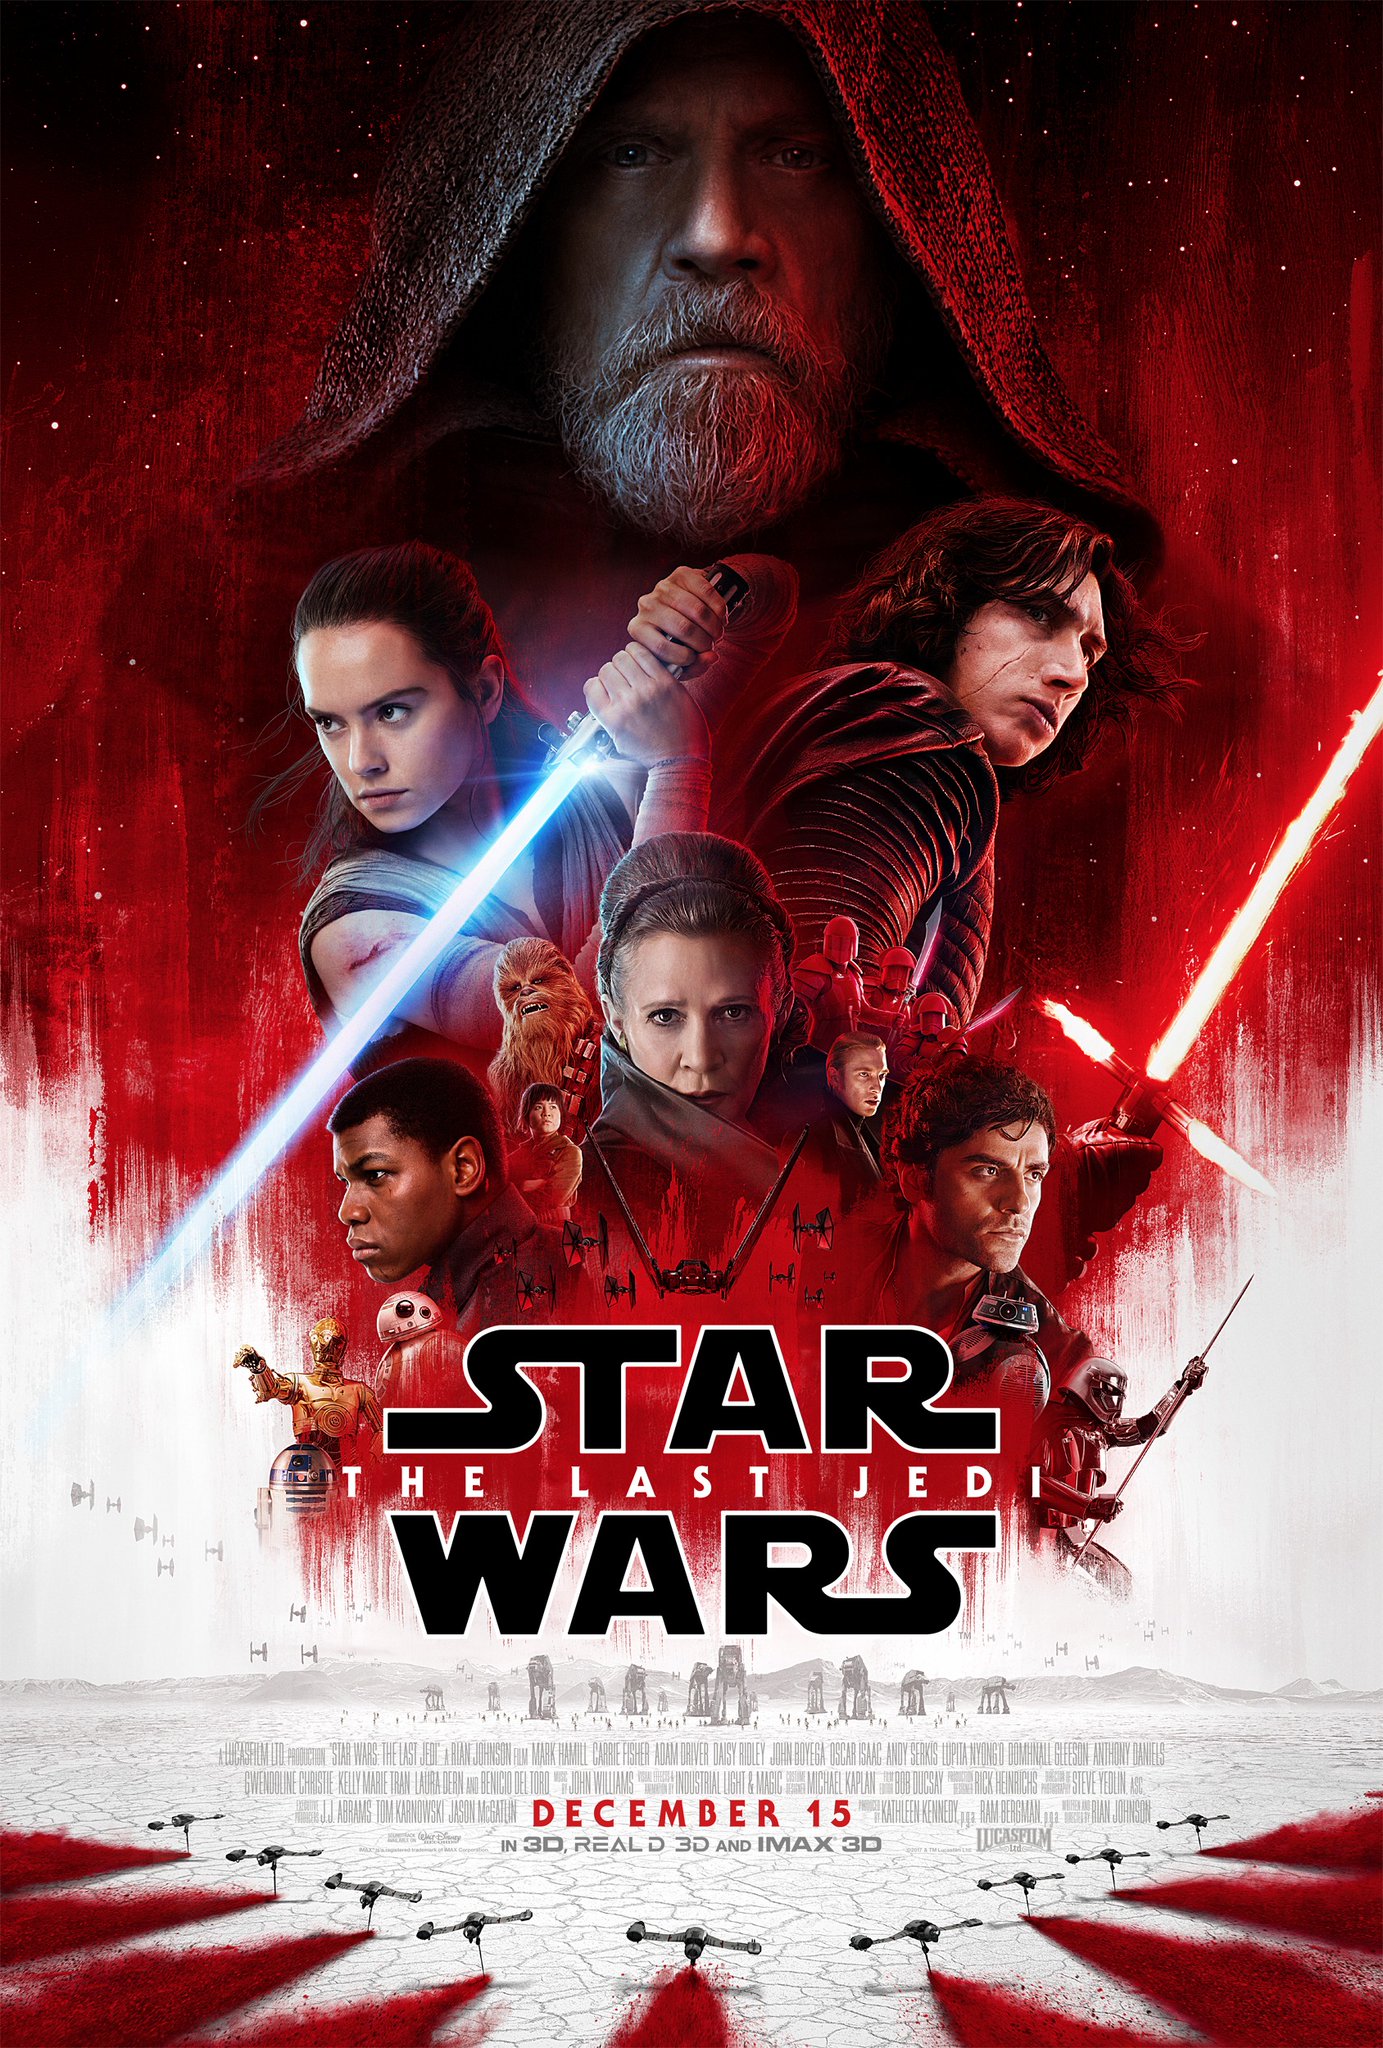 The Latest Poster For The Last Jedi Puts General Leia Front And Center